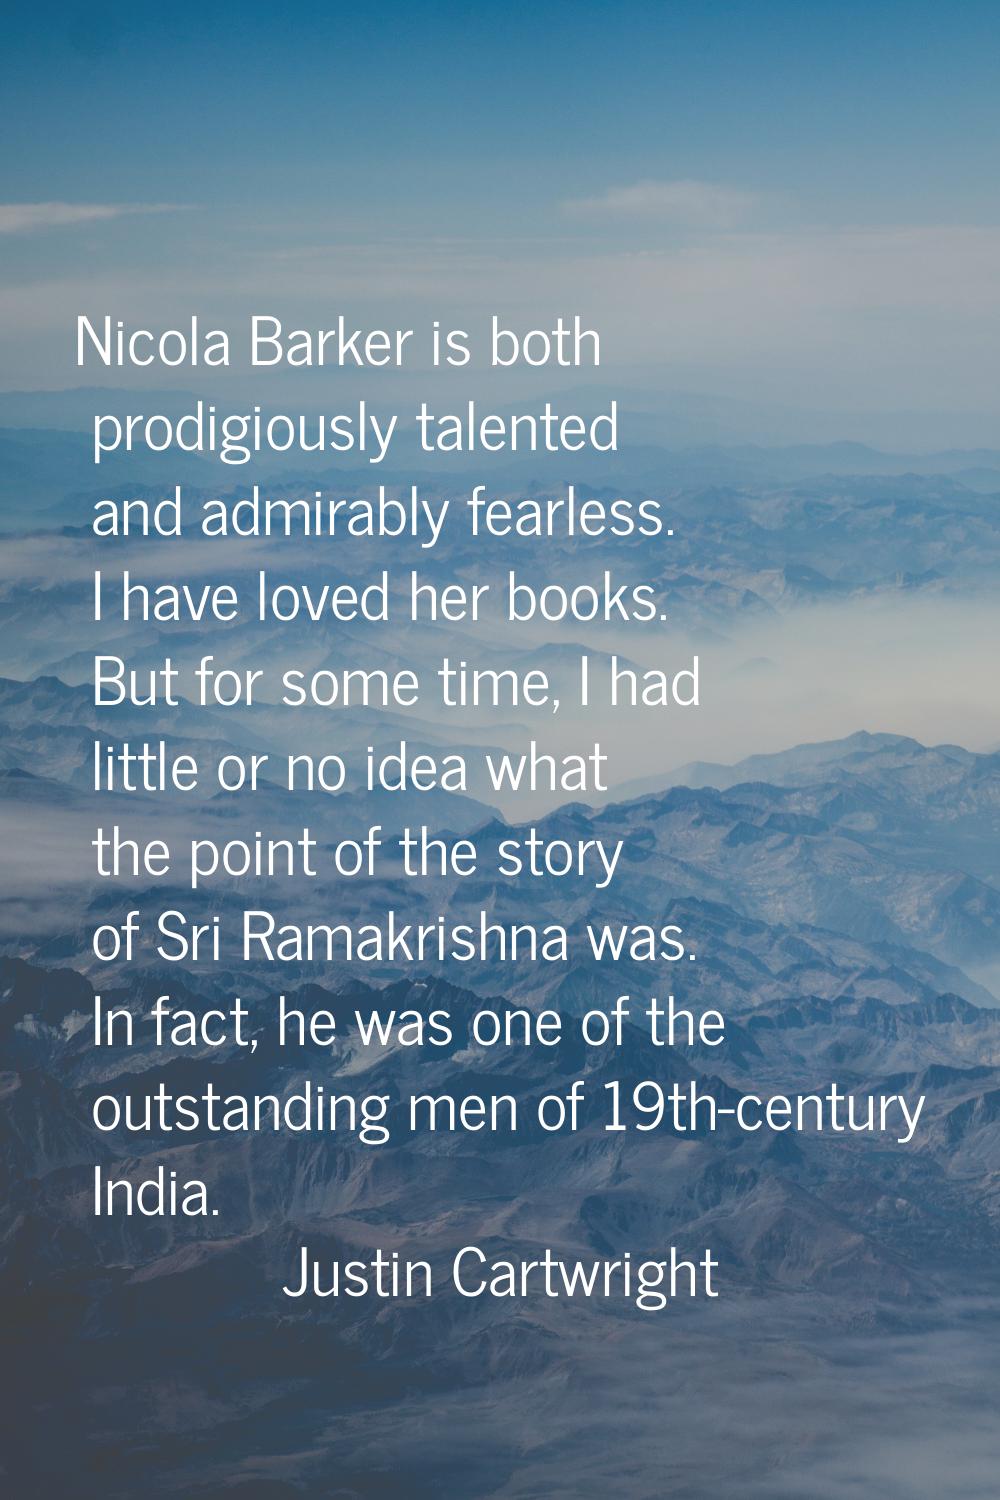 Nicola Barker is both prodigiously talented and admirably fearless. I have loved her books. But for